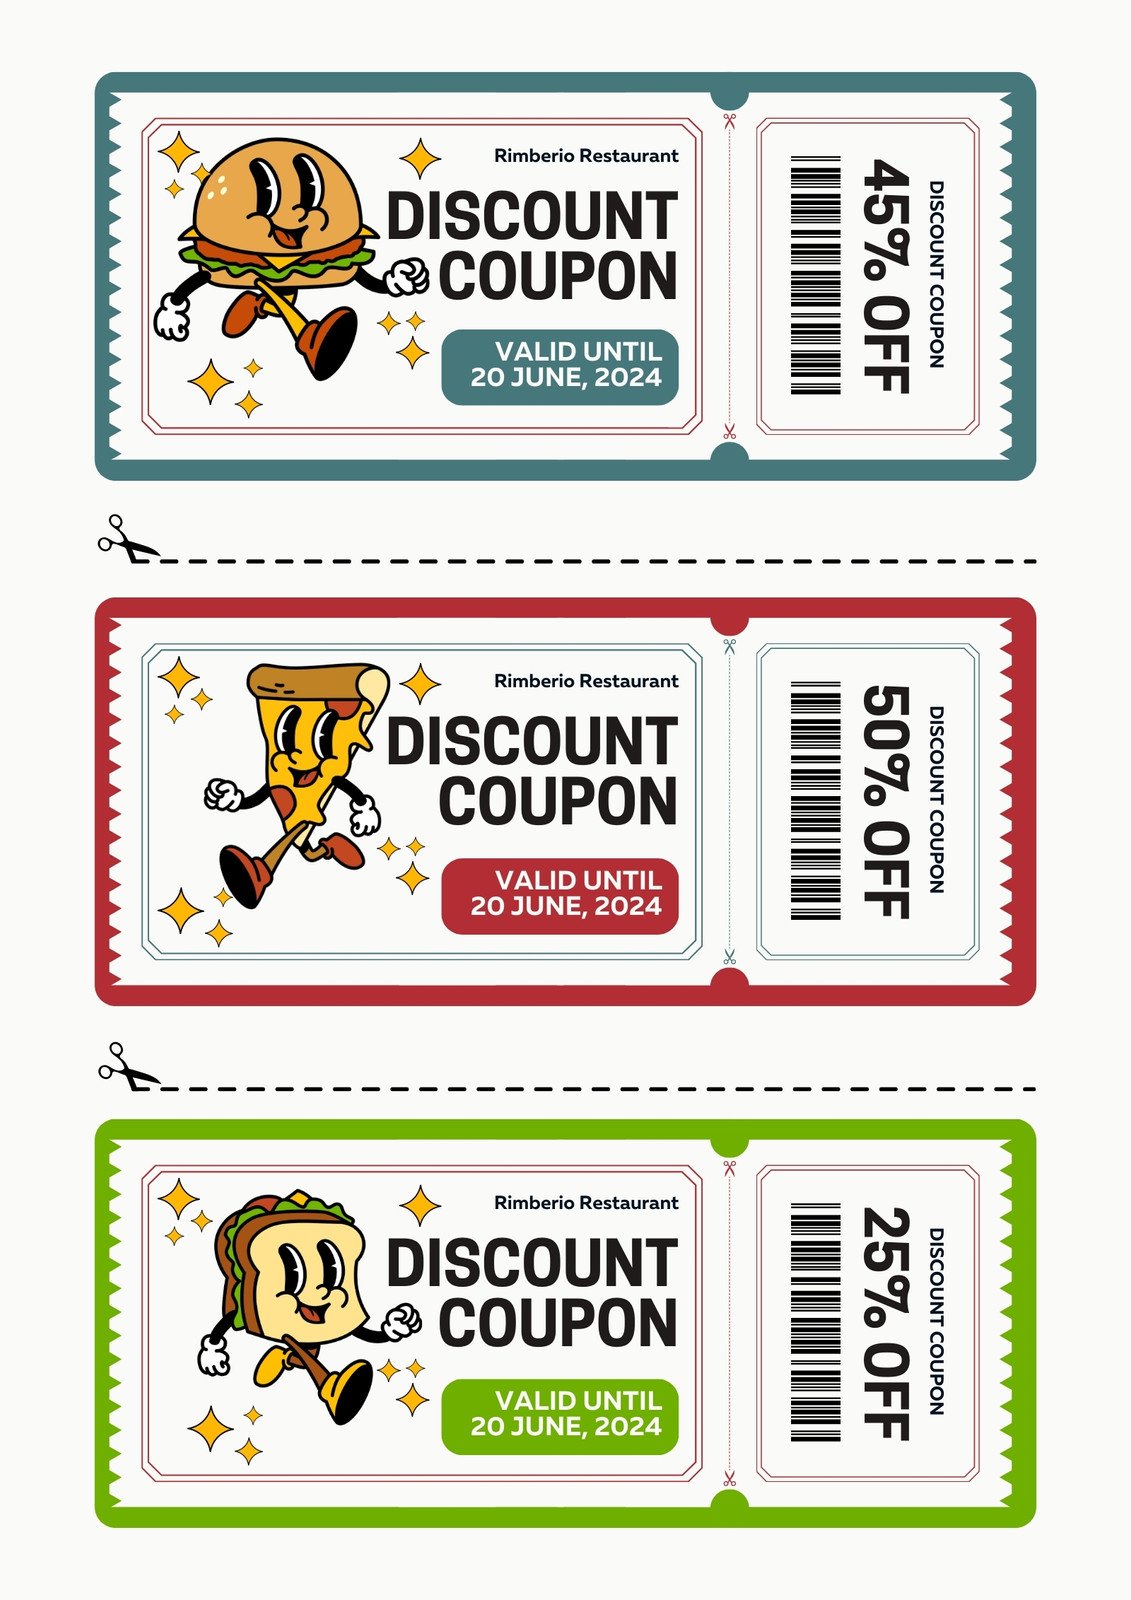 Budget-friendly restaurant coupons